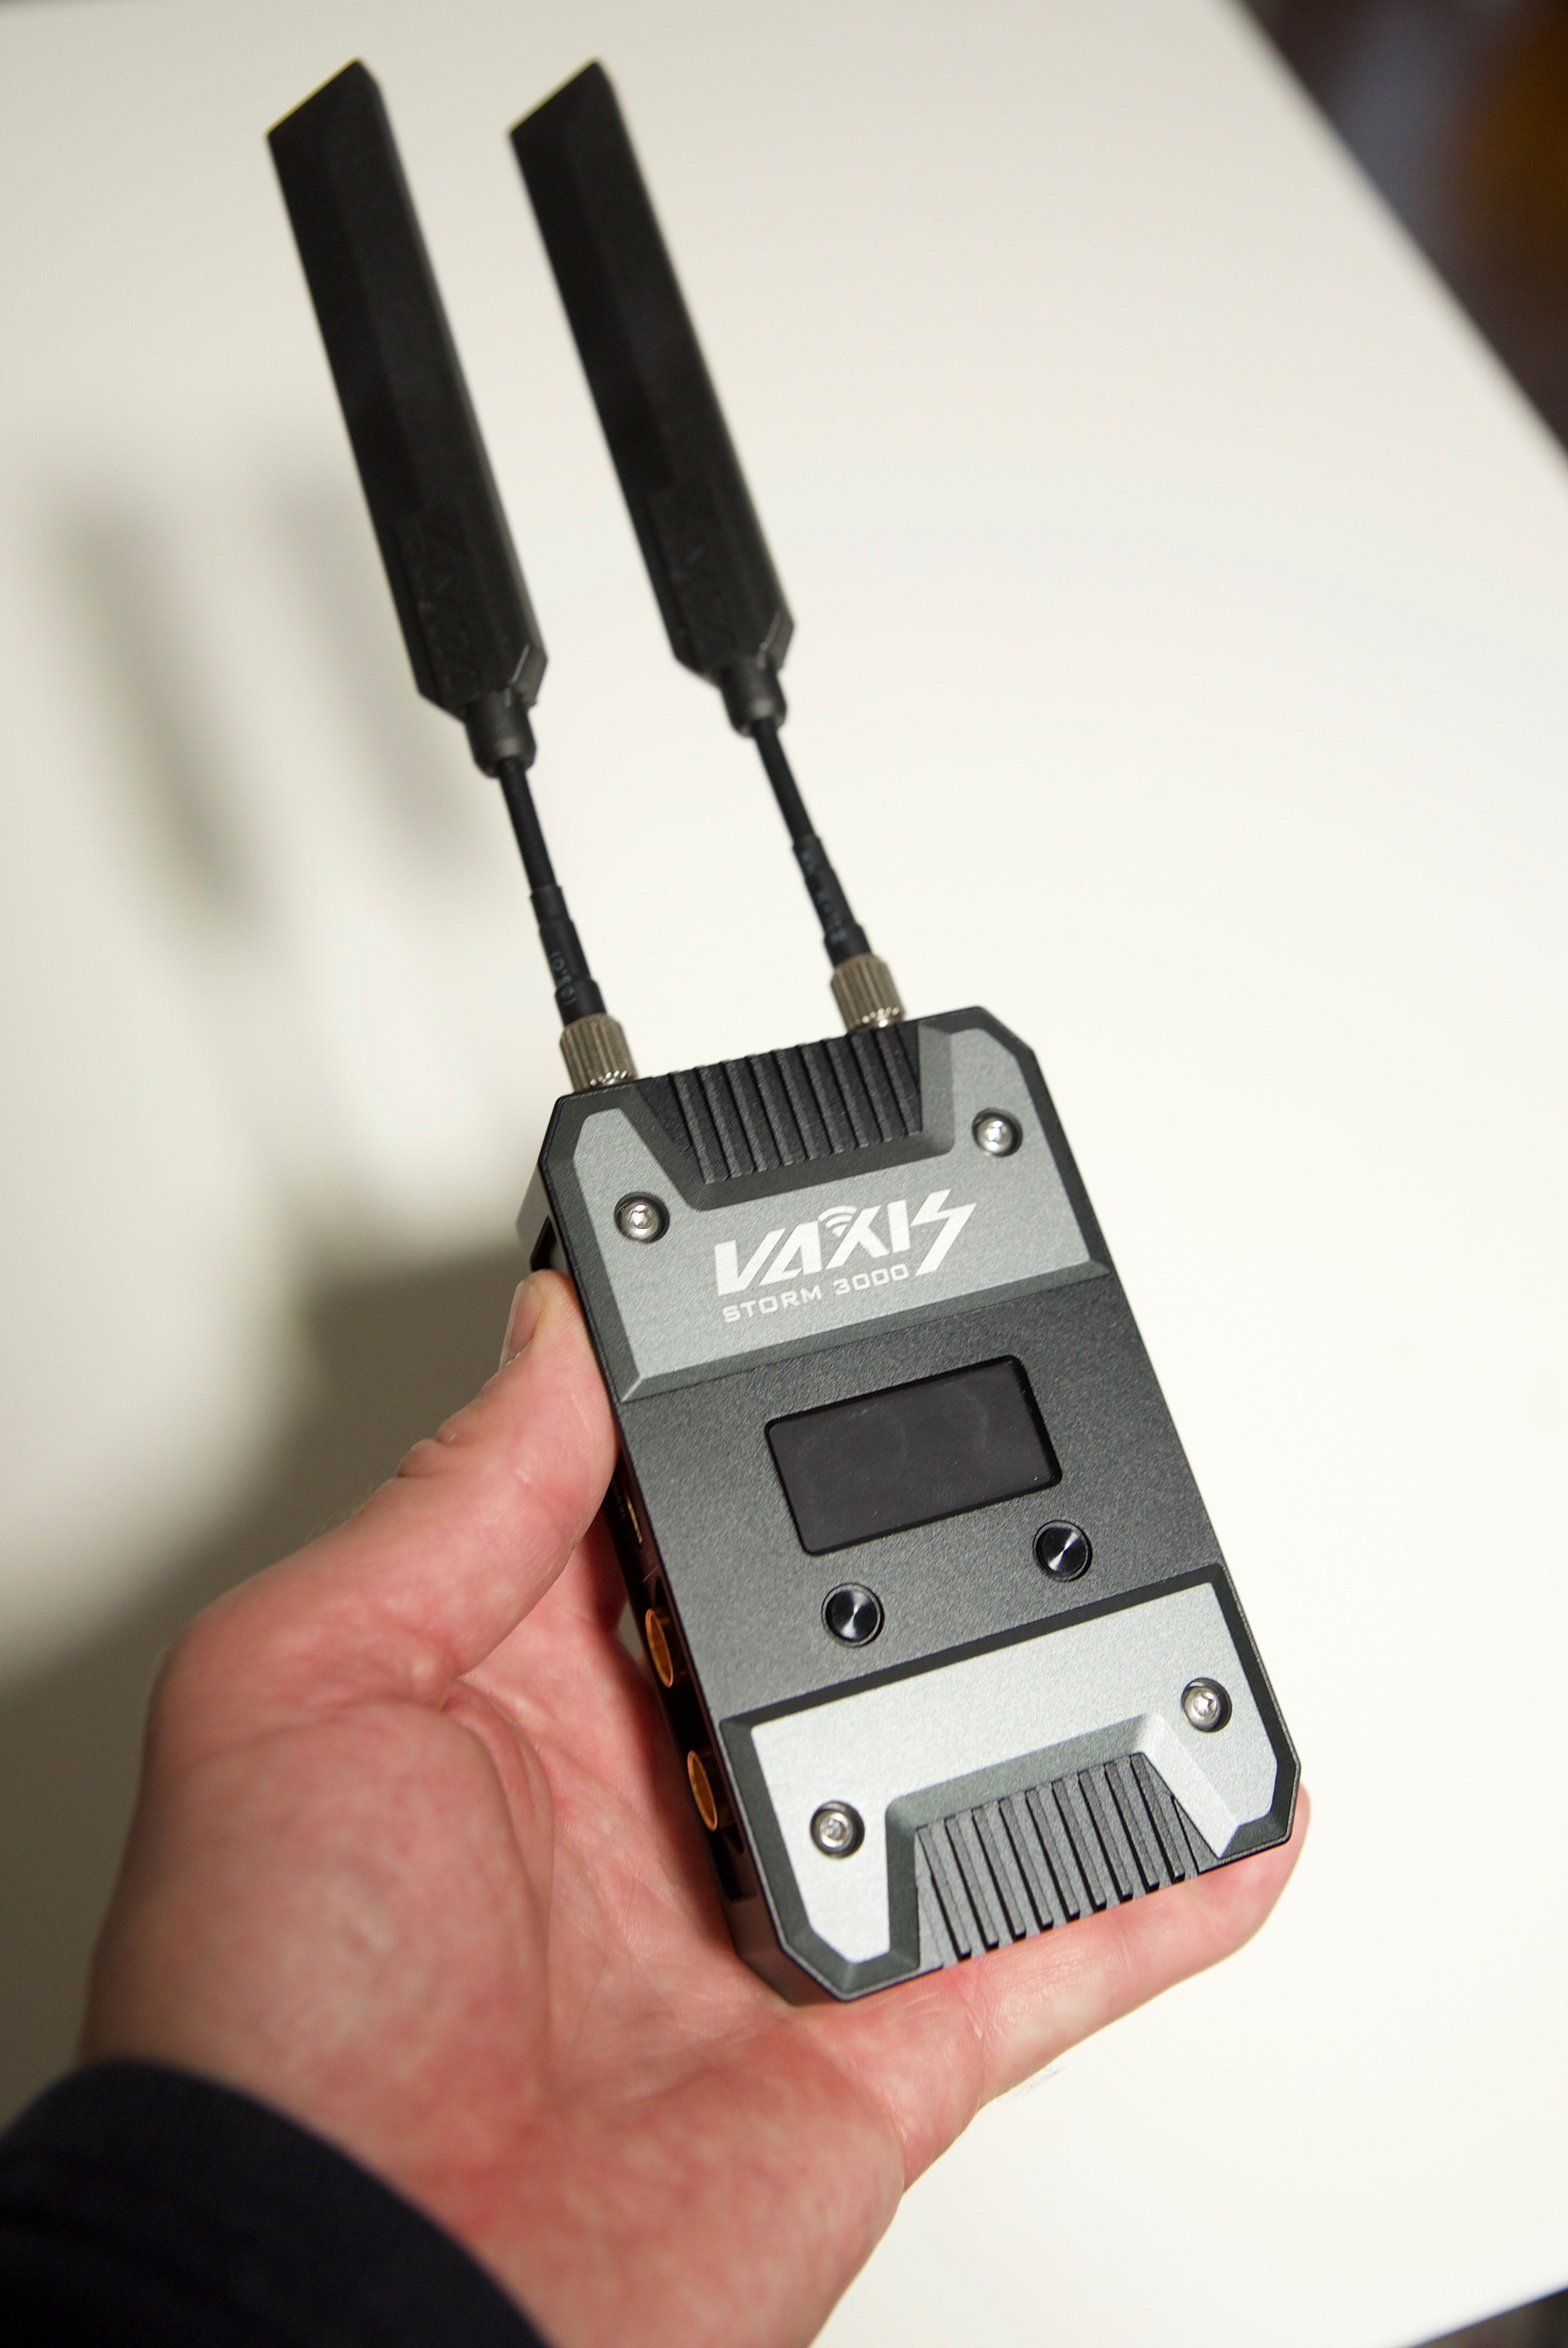 Vaxis Storm 3000 Transmitter in the hand